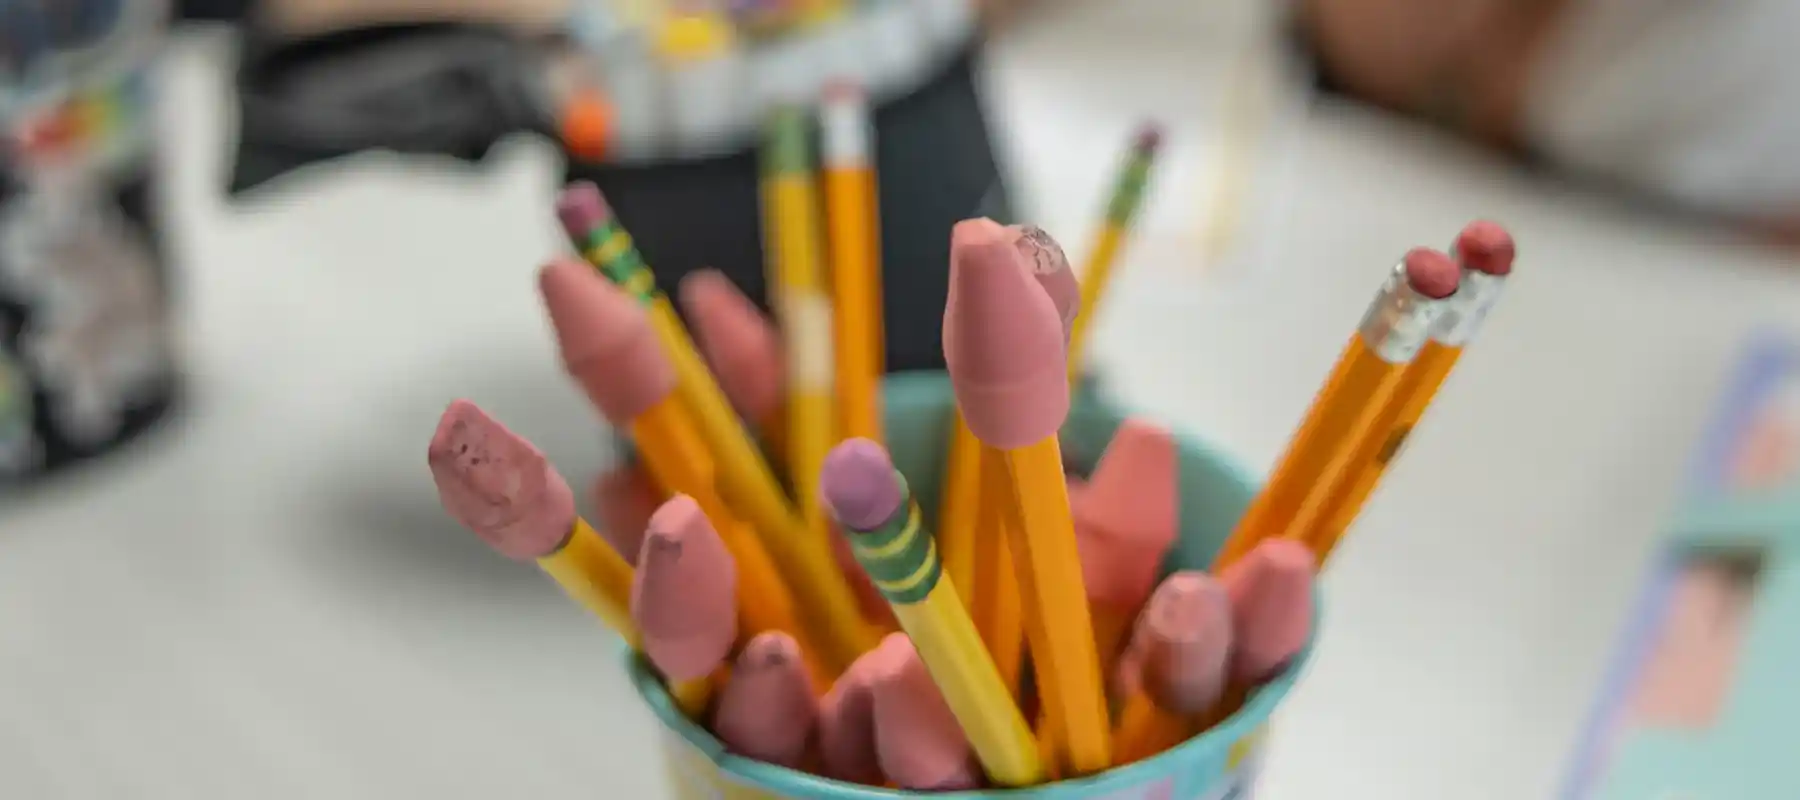 A supply cup full of pencils with erasers sitting a desk with a blurred teacher and student working in the background at an accredited therapeutic boarding school.